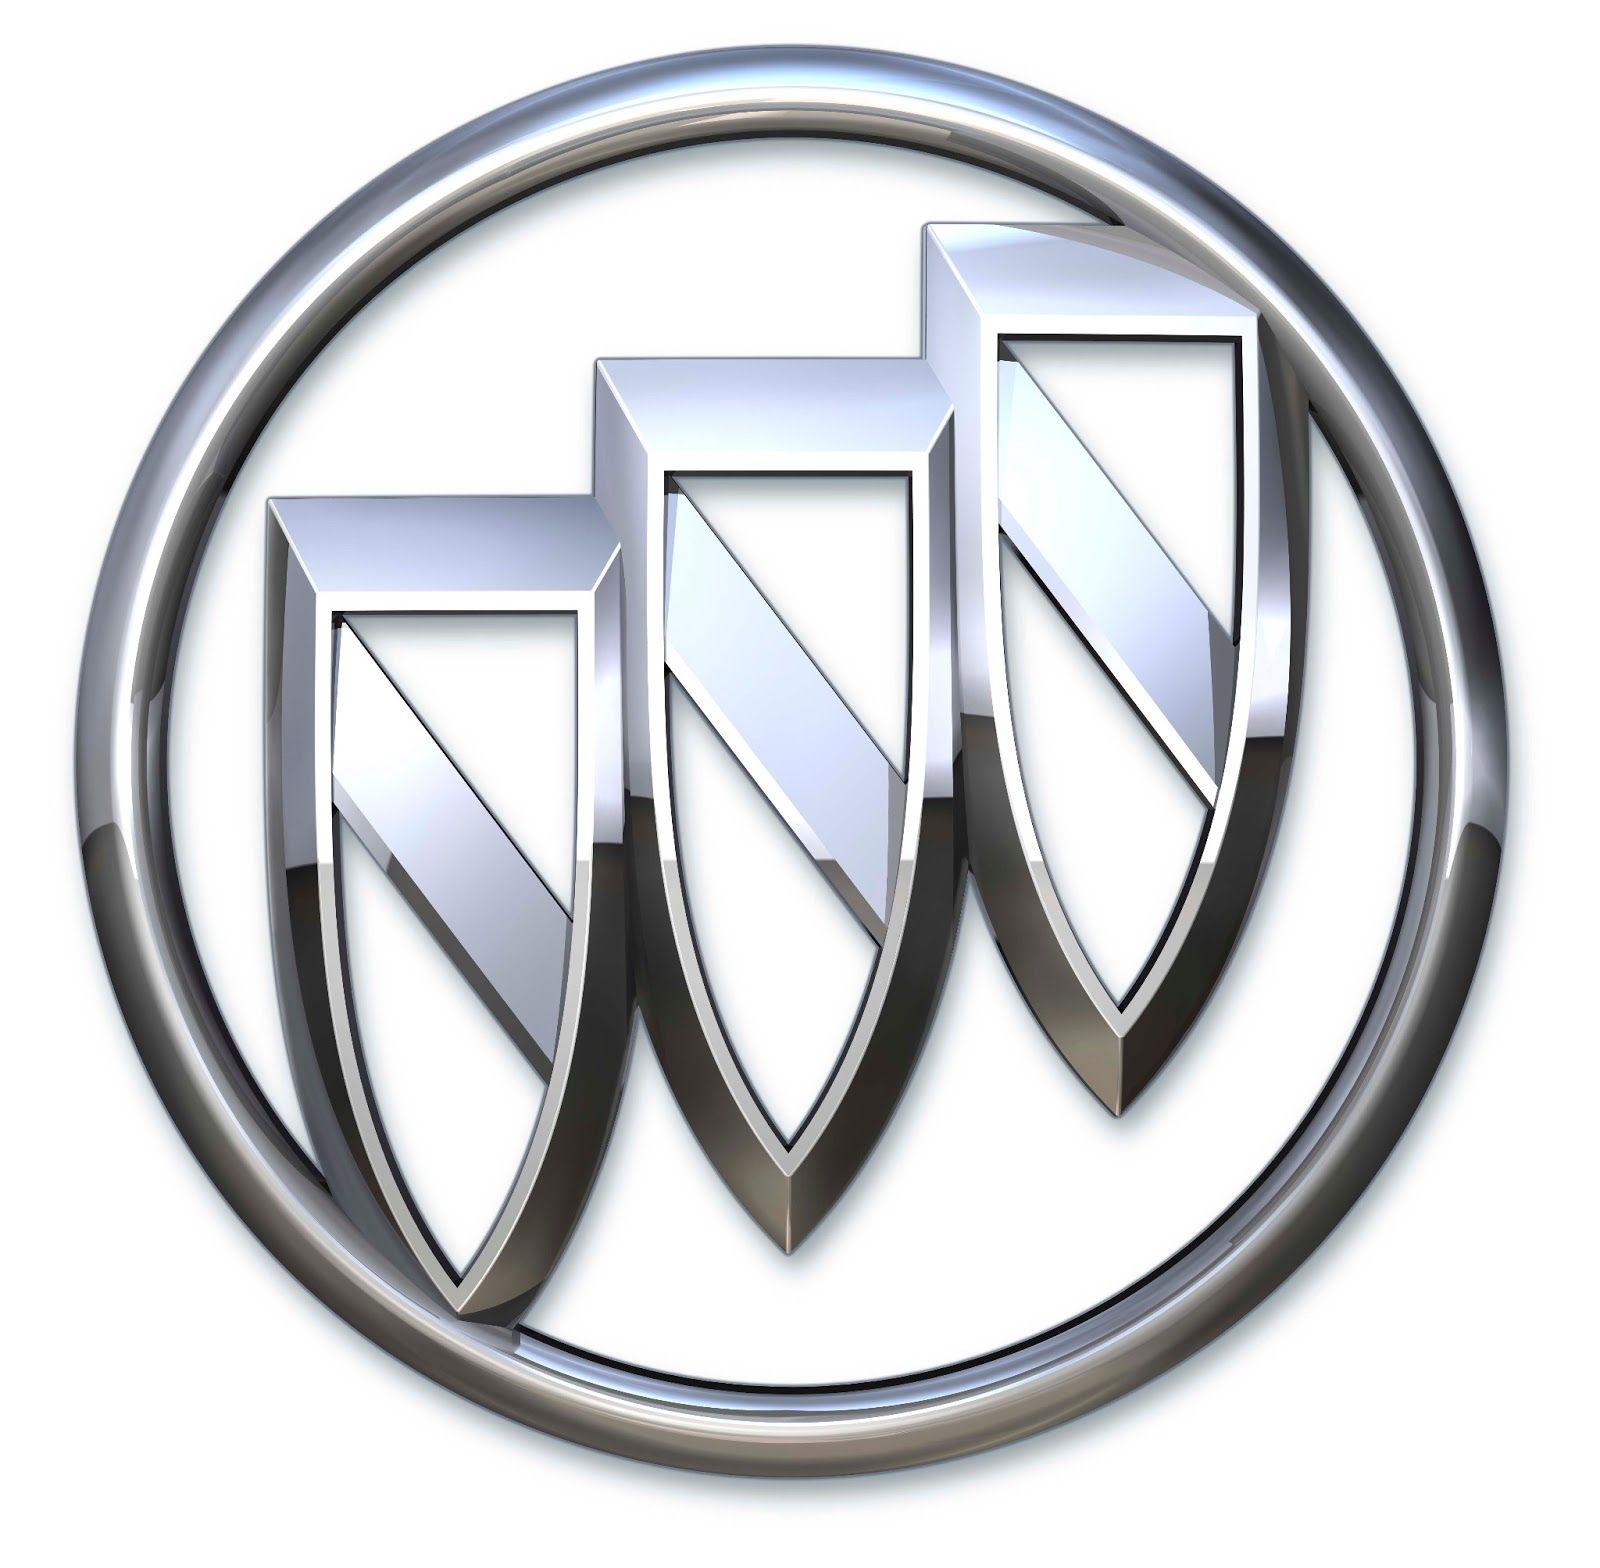 Silver and Red Shield Car Logo - Buick Logo, Buick Car Symbol Meaning and History | Car Brand Names.com